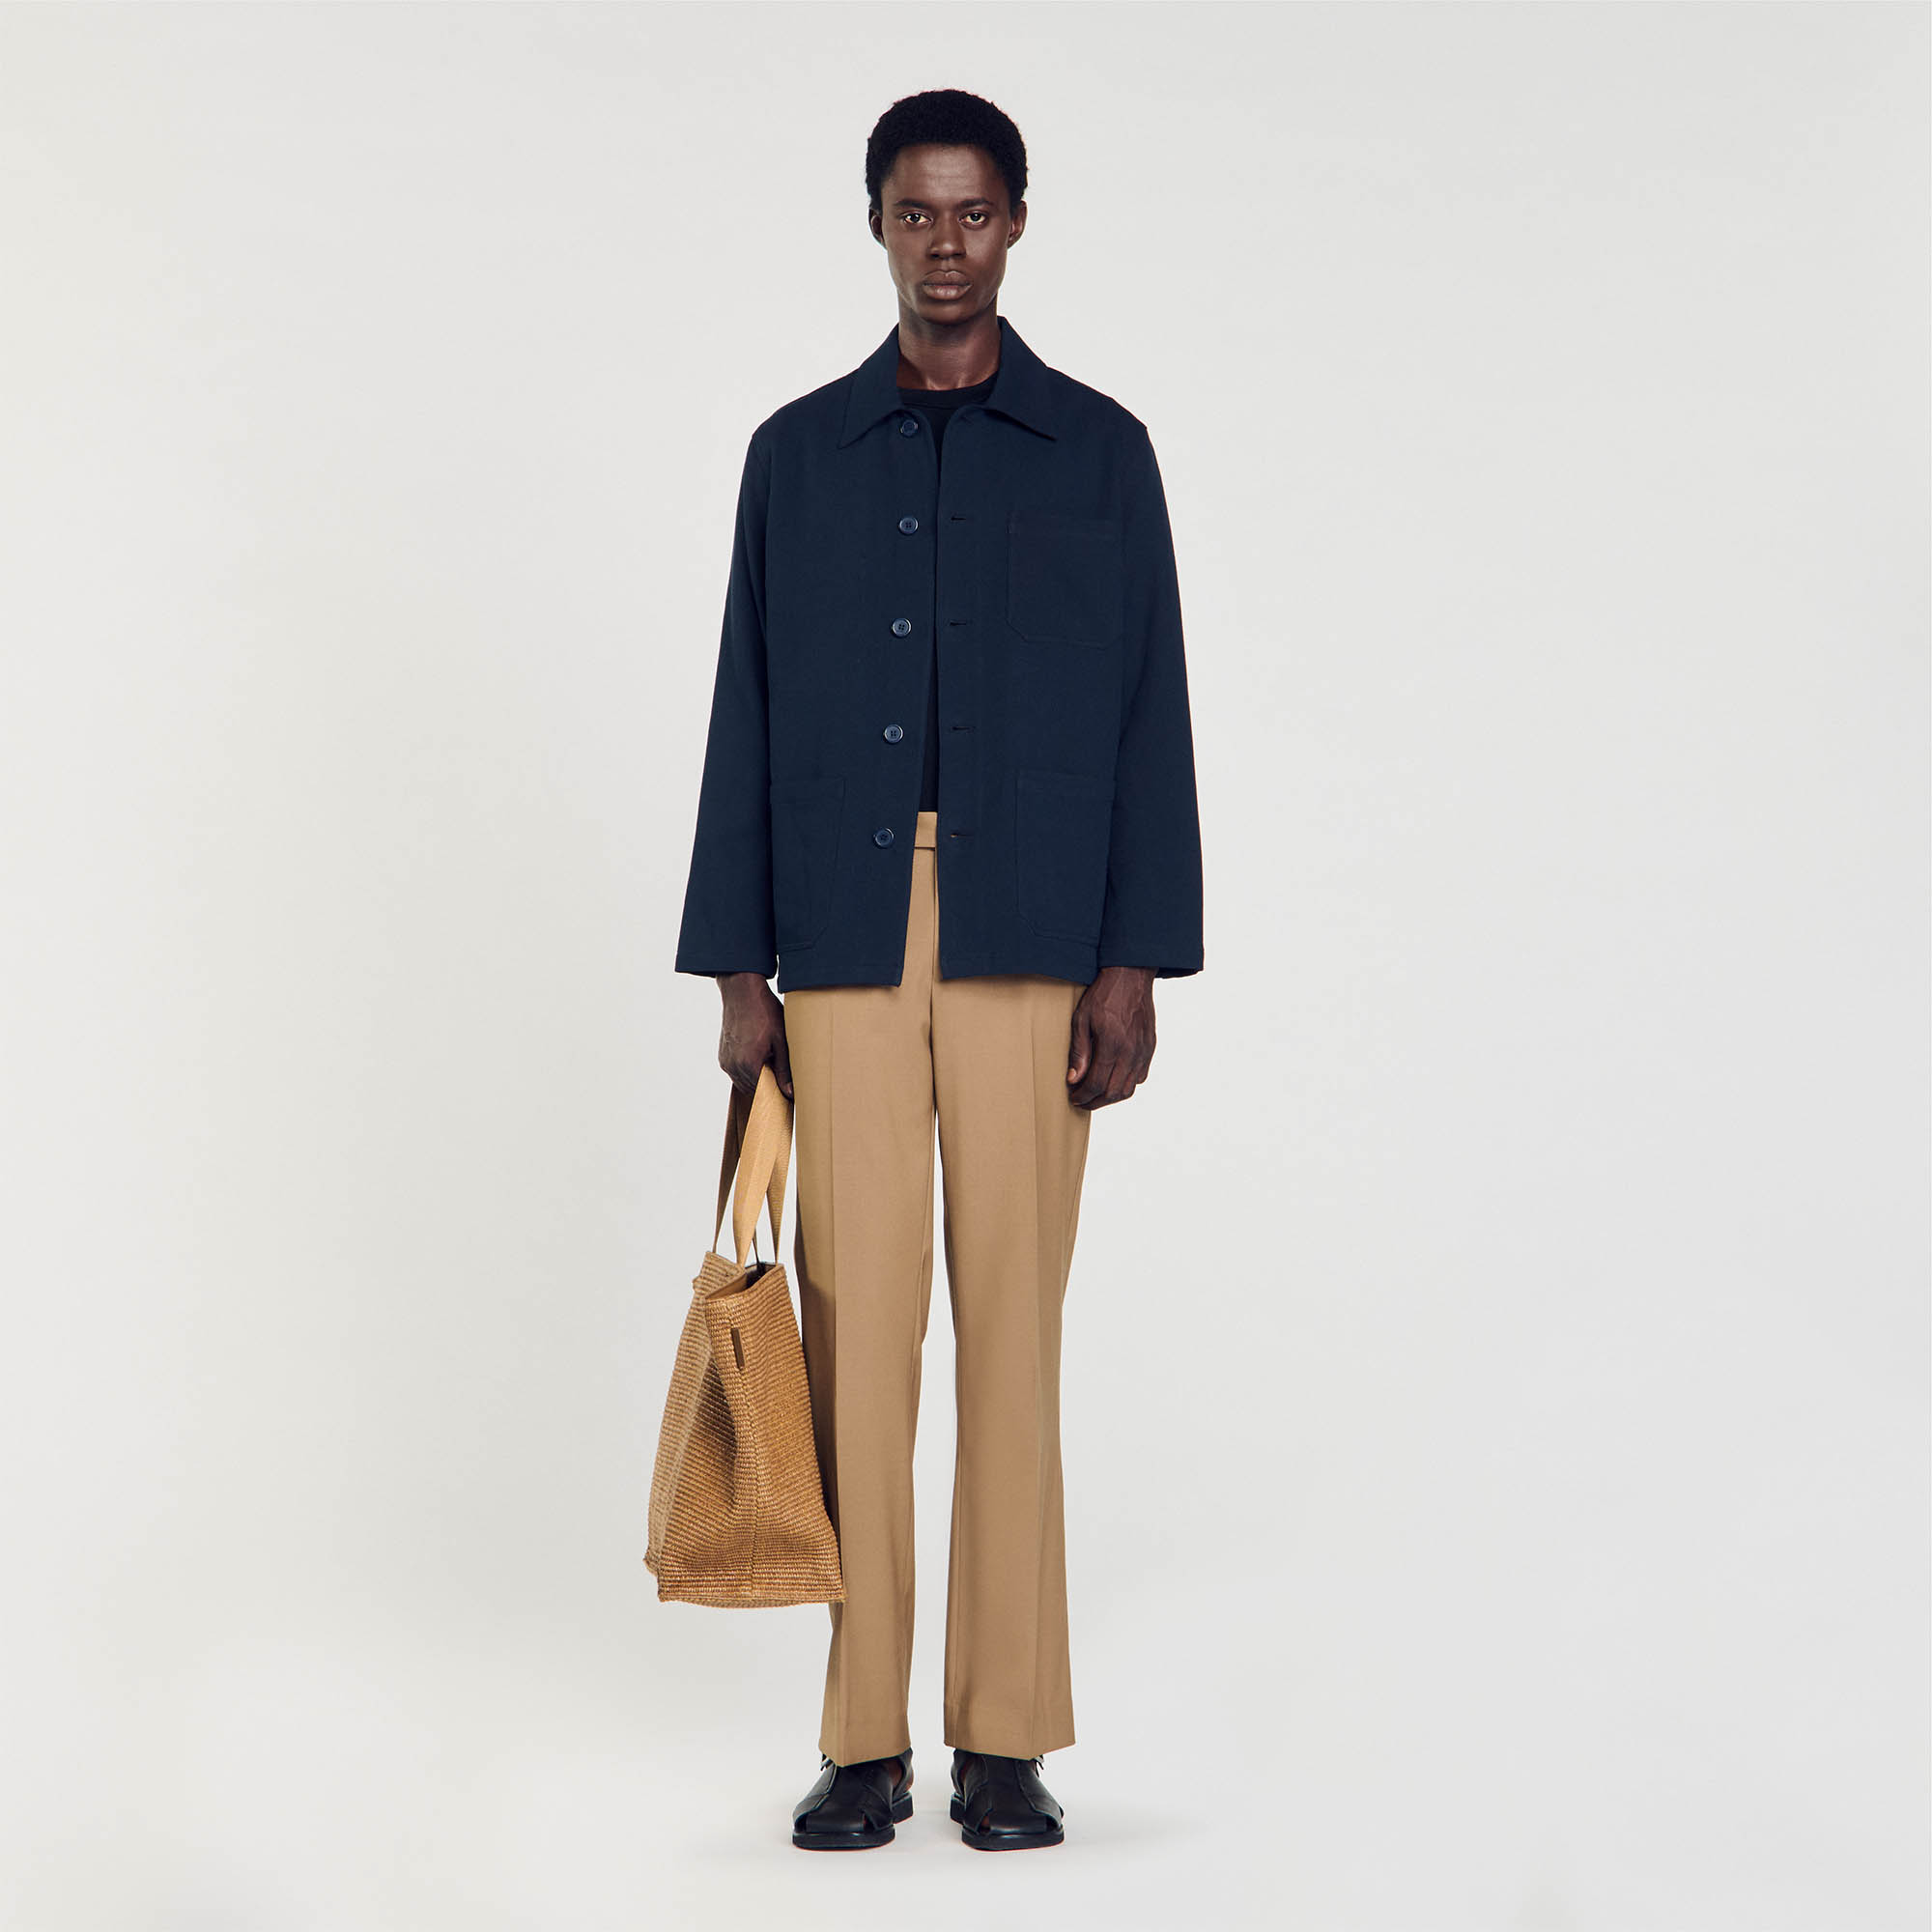 Sandro cotton Worker jacket with a collar, a button fastening, long sleeves and patch pockets